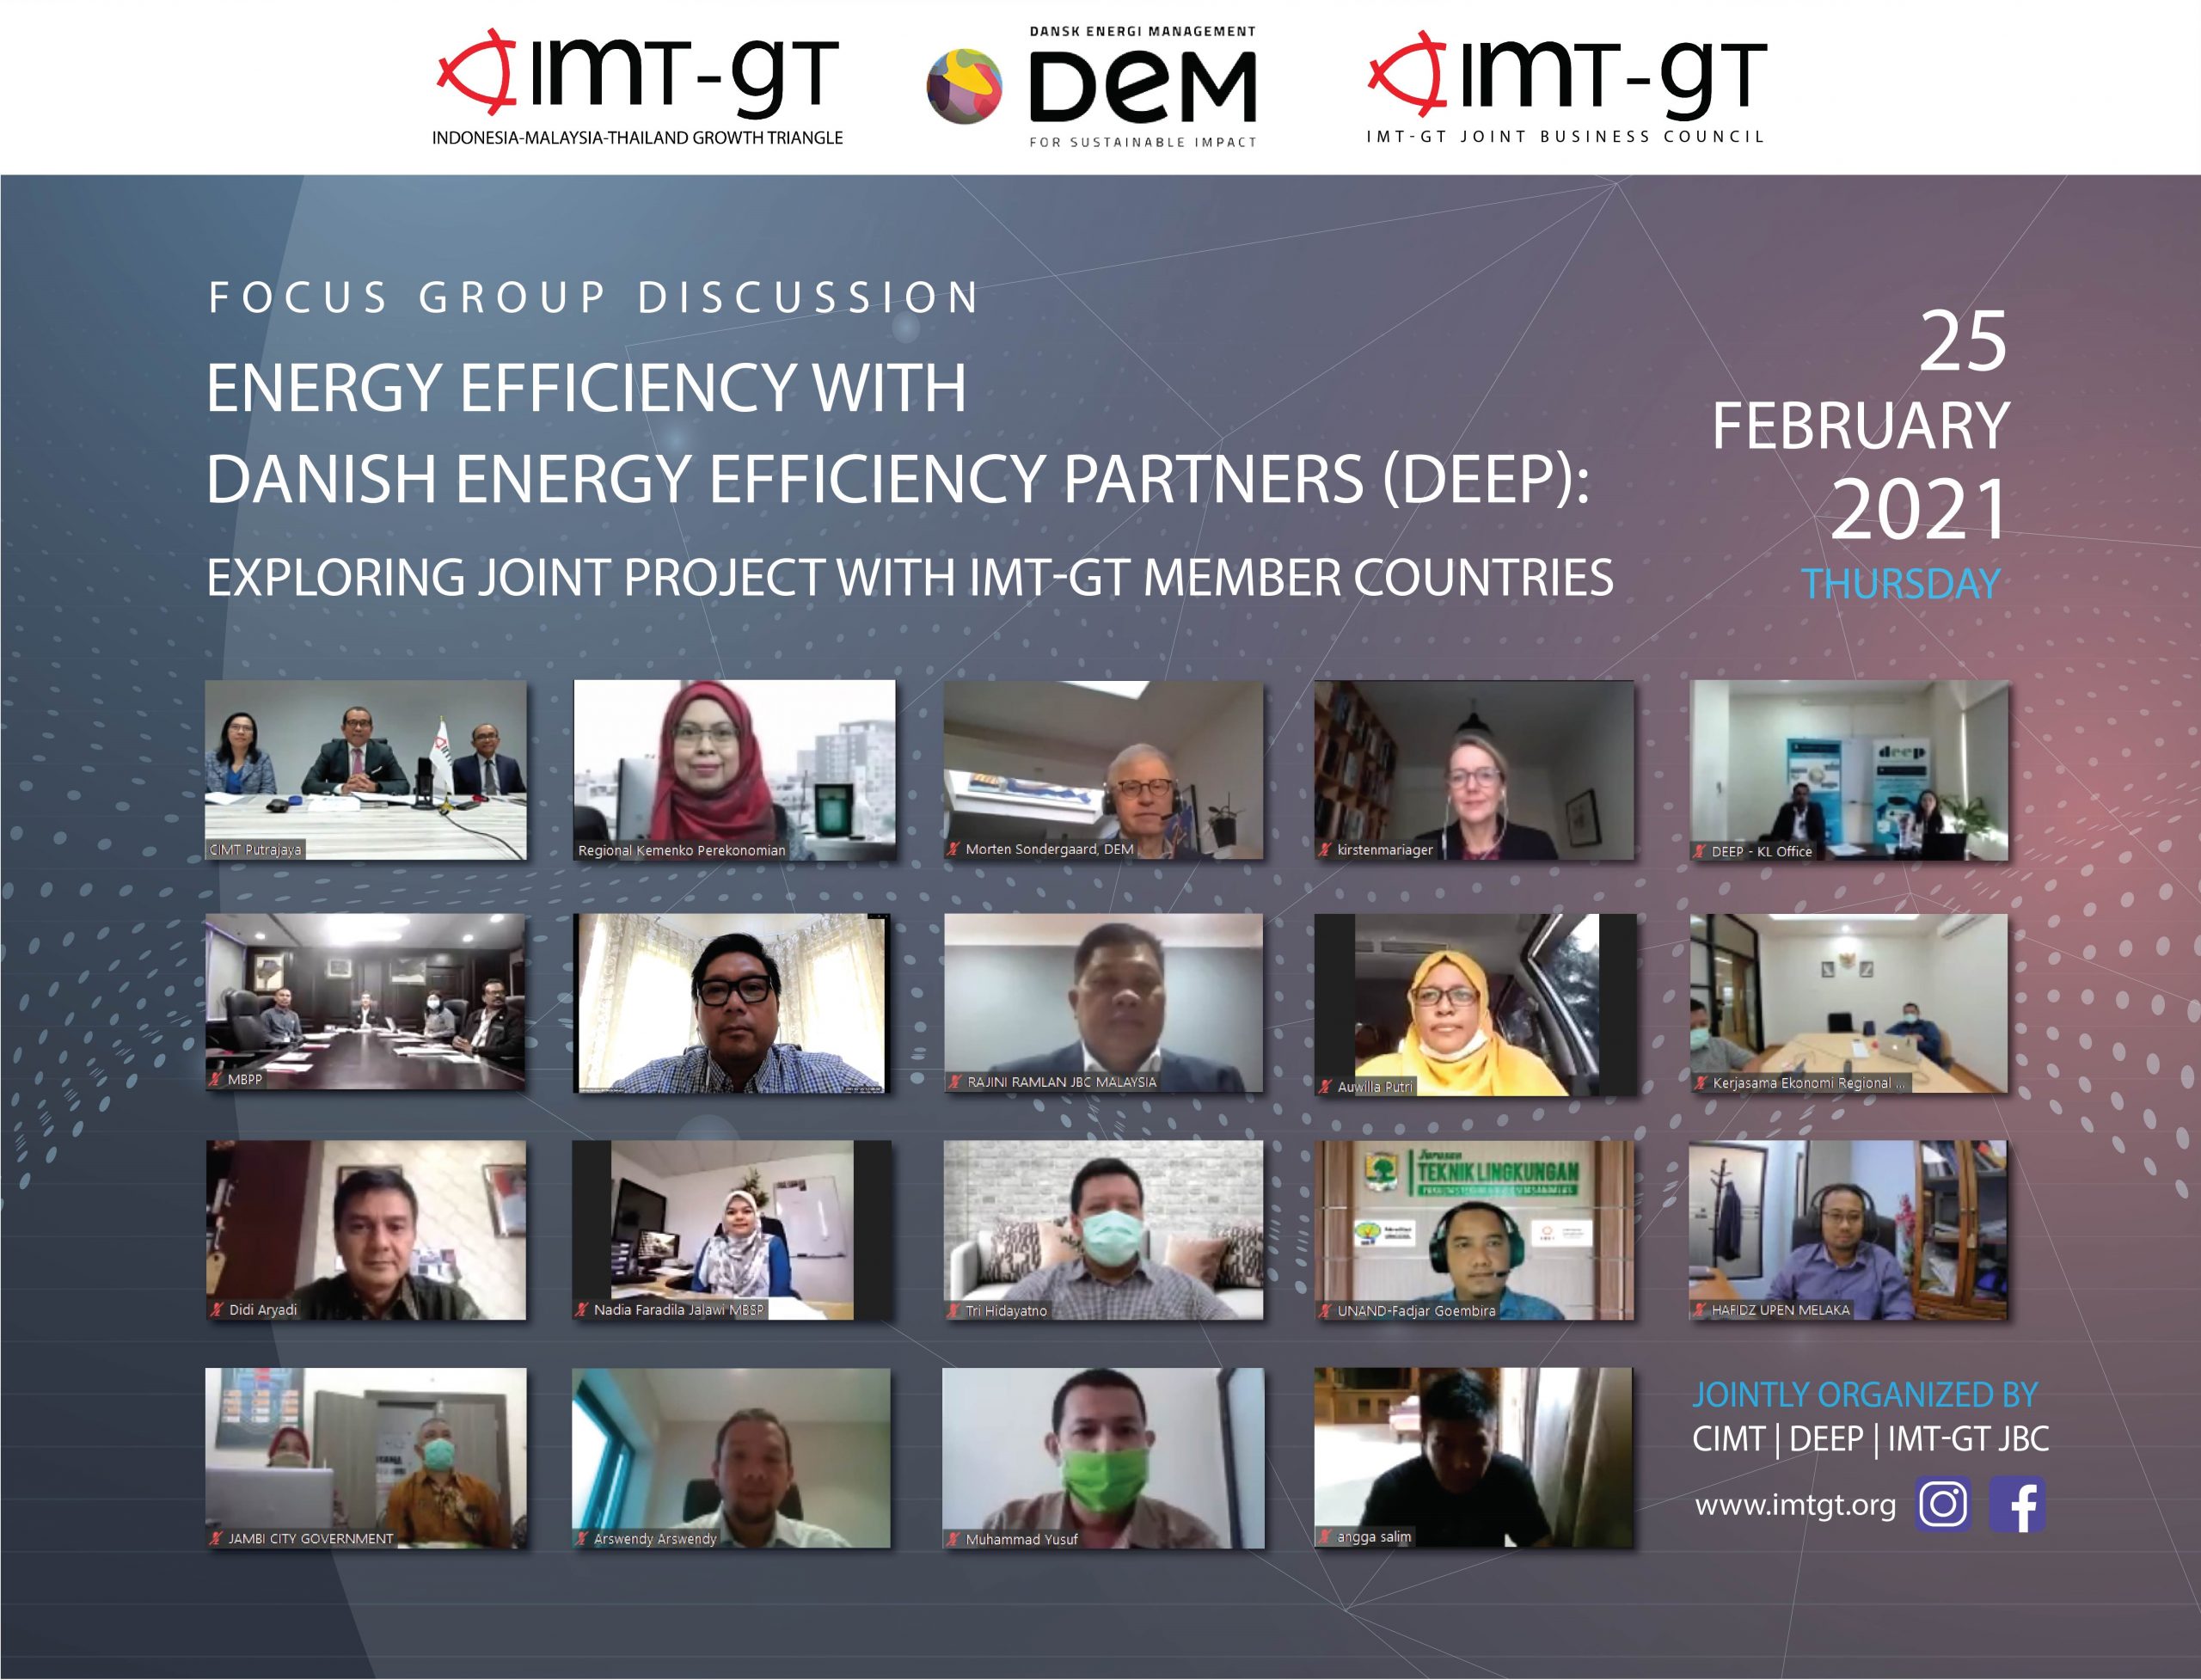 FOCUS GROUP DISCUSSION (FGD) ON ENERGY EFFICIENCY WITH DANISH ENERGY EFFICIENCY PARTNERS (DEEP): EXPLORING JOINT PROJECT WITH IMT-GT MEMBER COUNTRIES, 25 FEBRUARY 2021